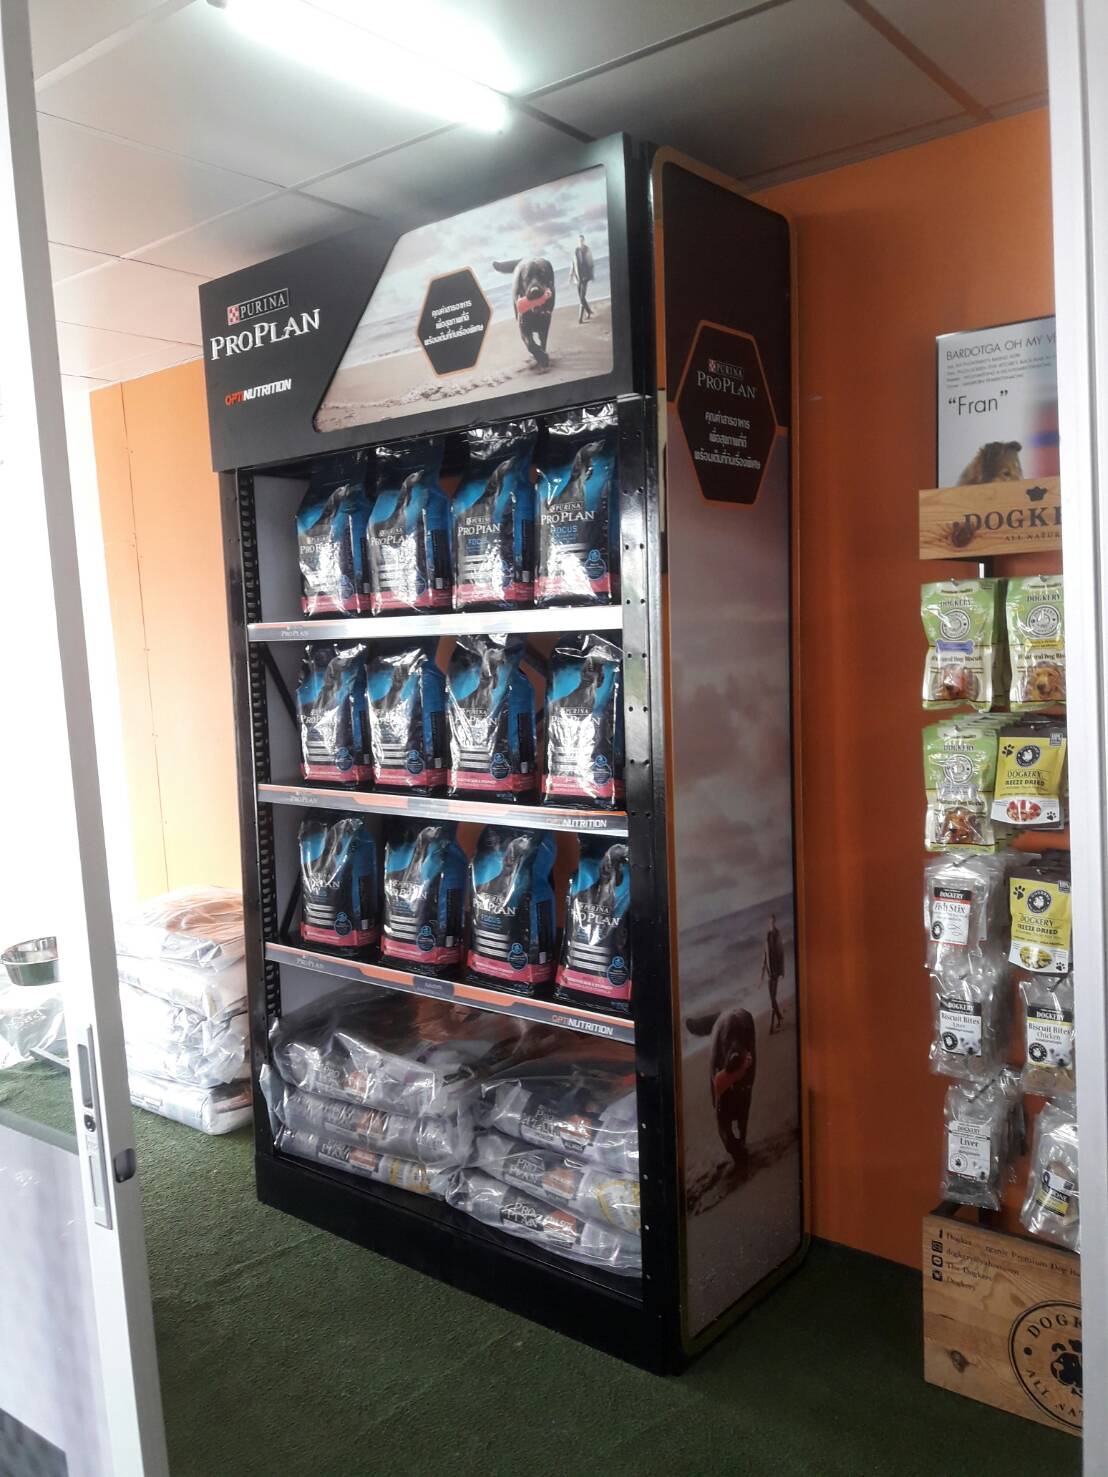 PRODUCT: PROPLAN